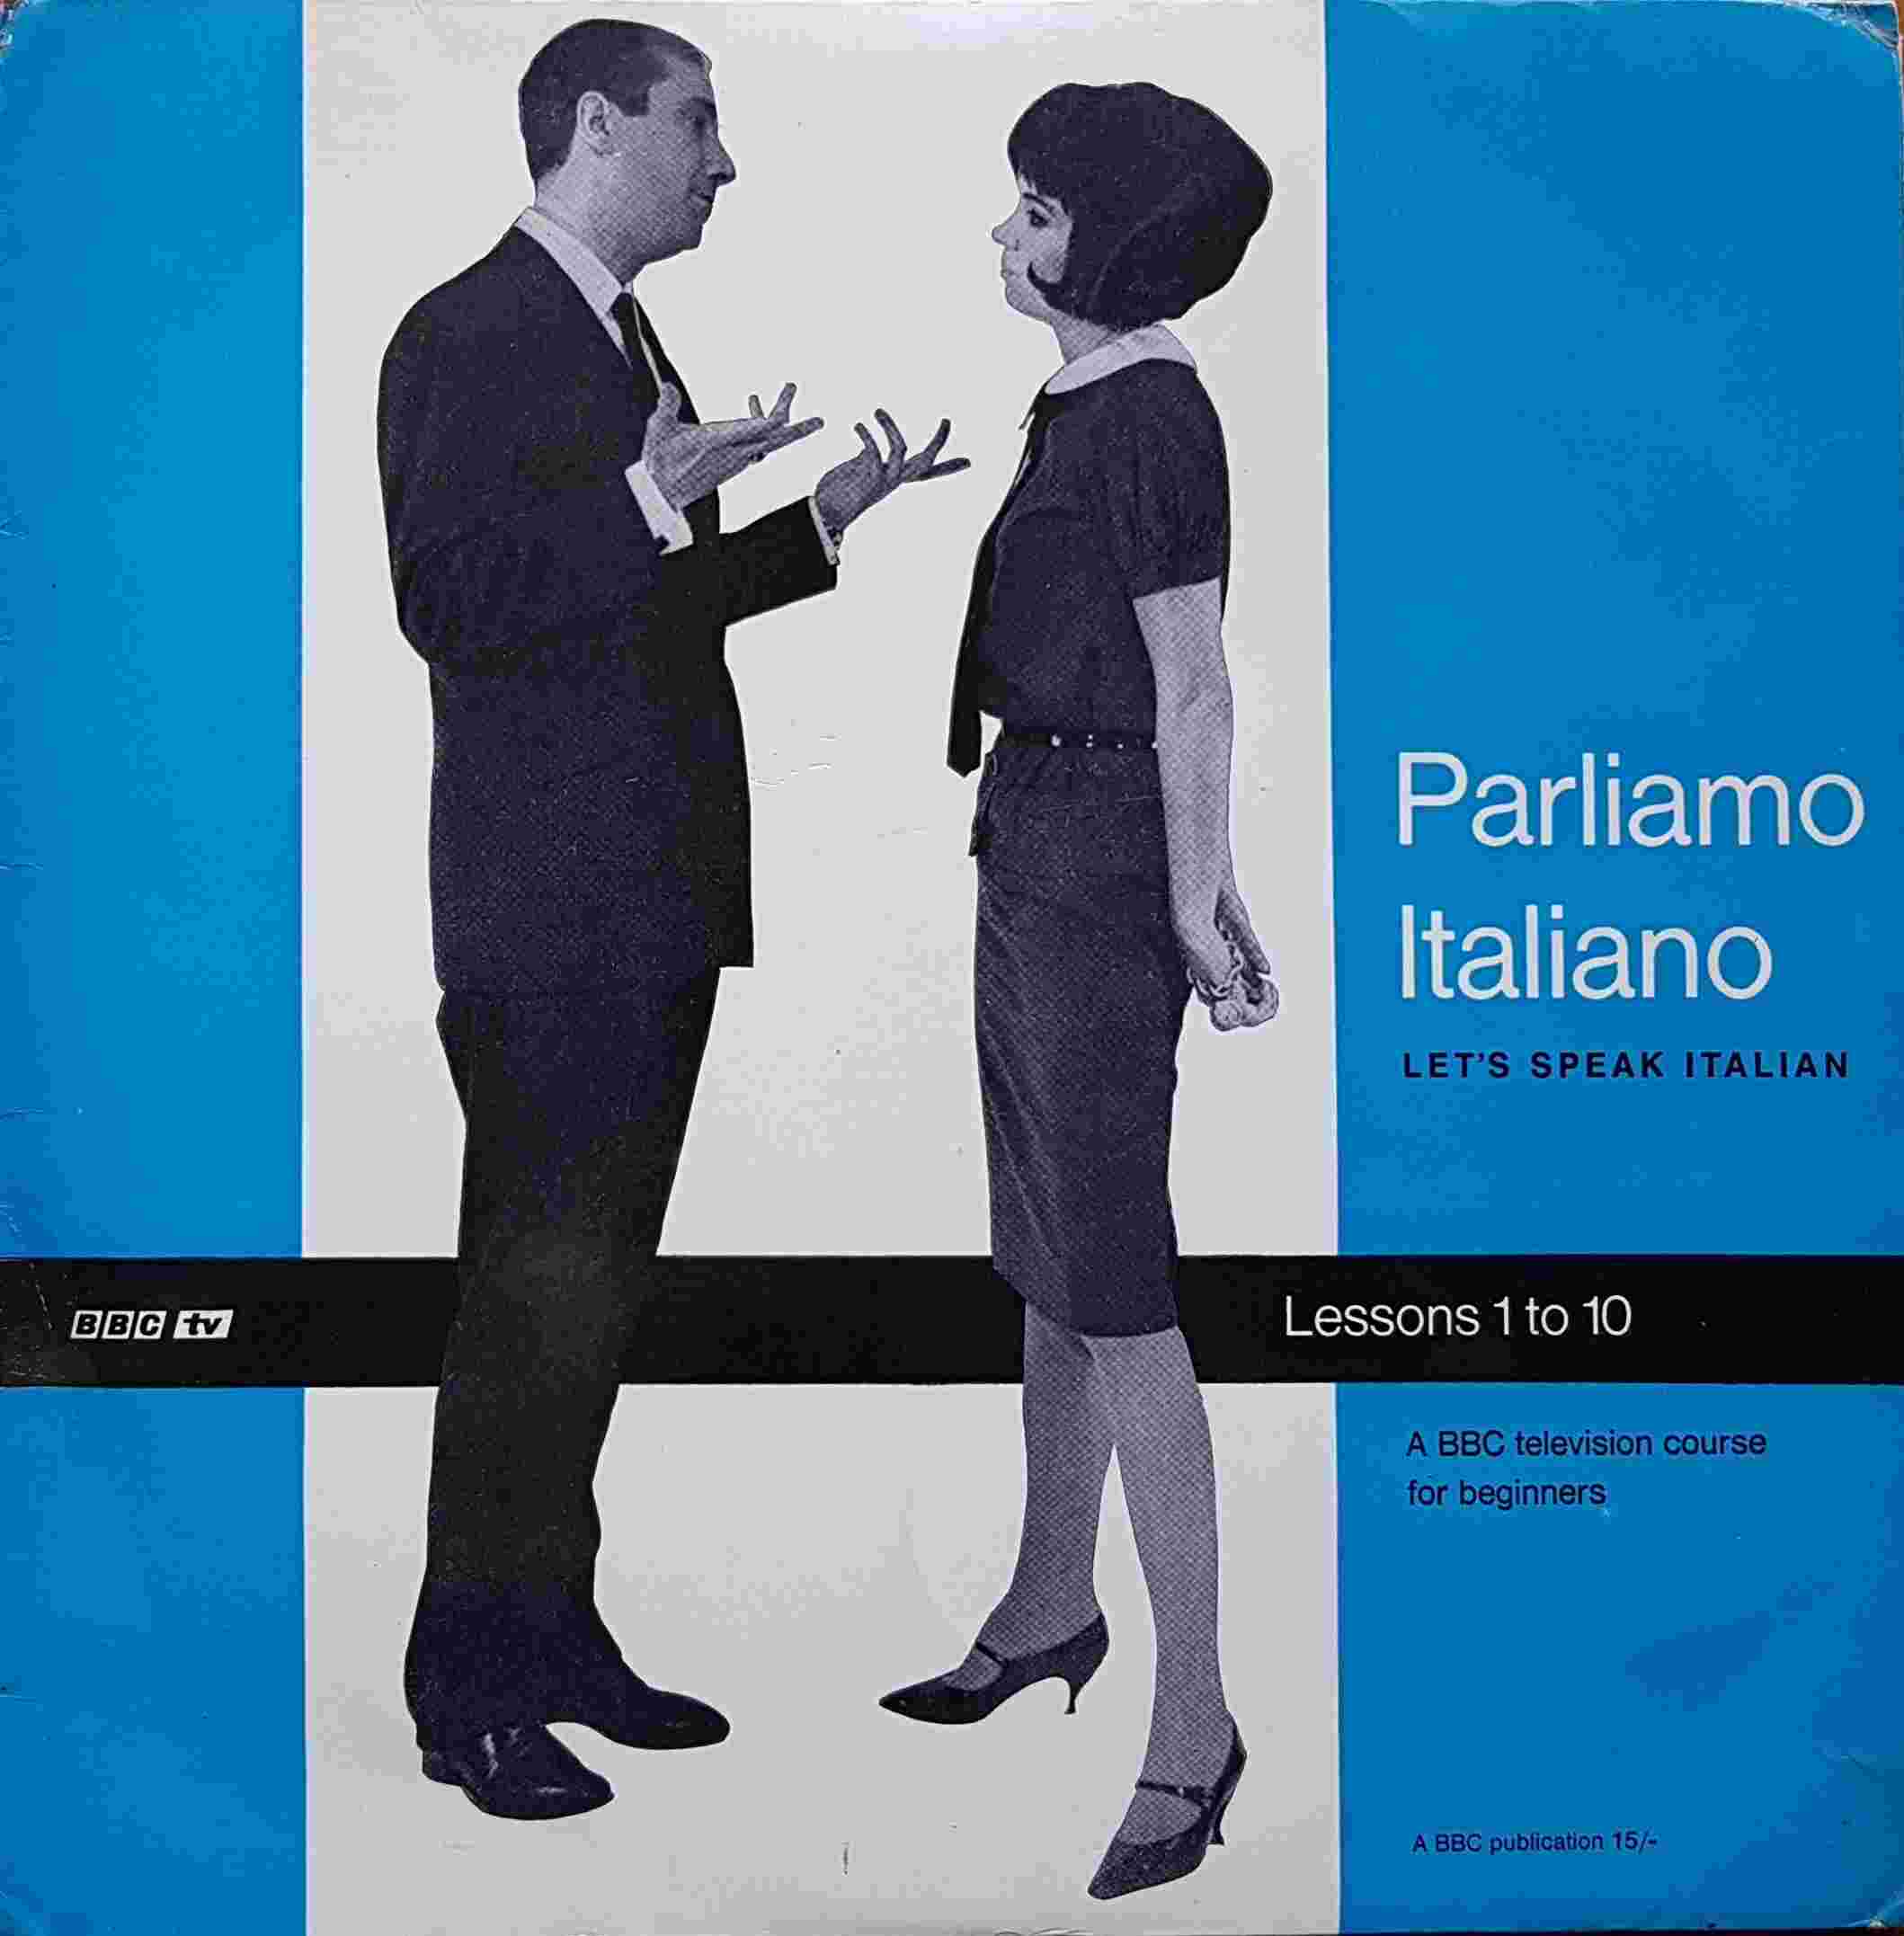 Picture of Parliamo Italiano - Let's Speak Italian lessons 1 - 10 by artist Toni Cerutti from the BBC albums - Records and Tapes library